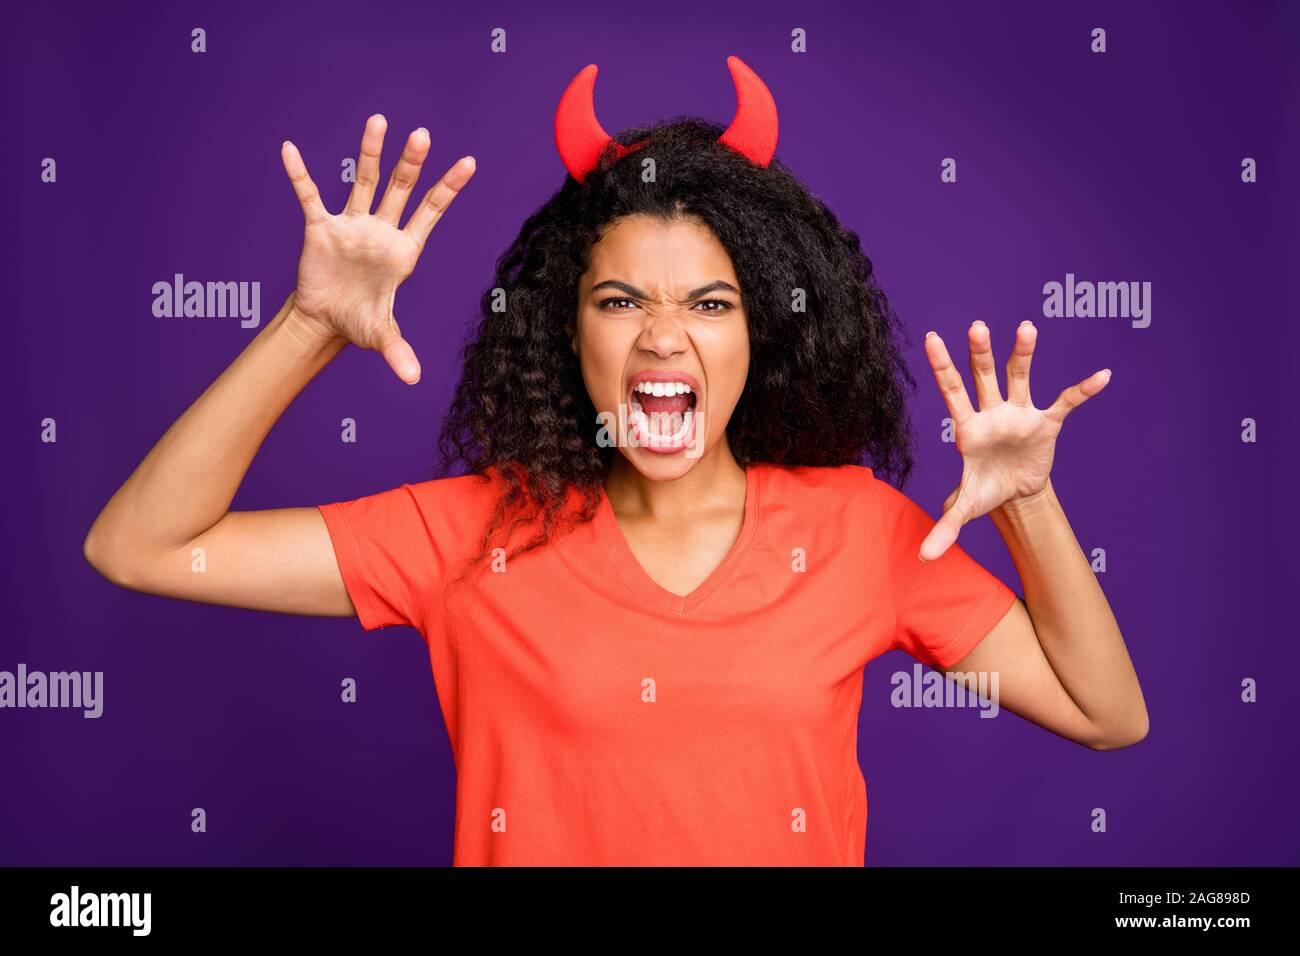 Photof of horrible terrifying mad insane occultist spooky attempting to frighten you with her frightful grimace on face roaring loudly in orange t Stock Photo